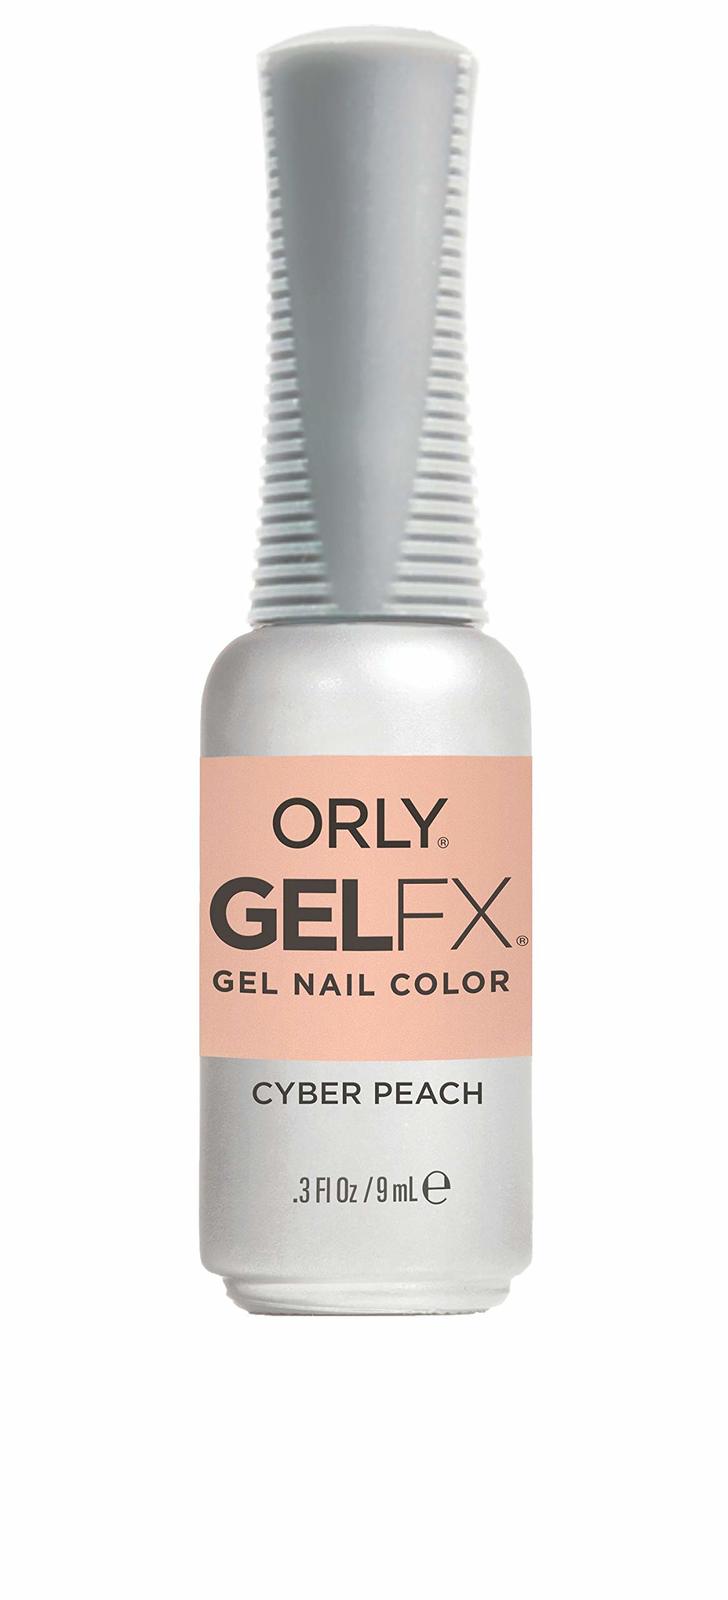 Gel Fx Gel Nail Color - 30970 Lilac City by Orly for Women - 0.3 oz Nail Polish - $11.50